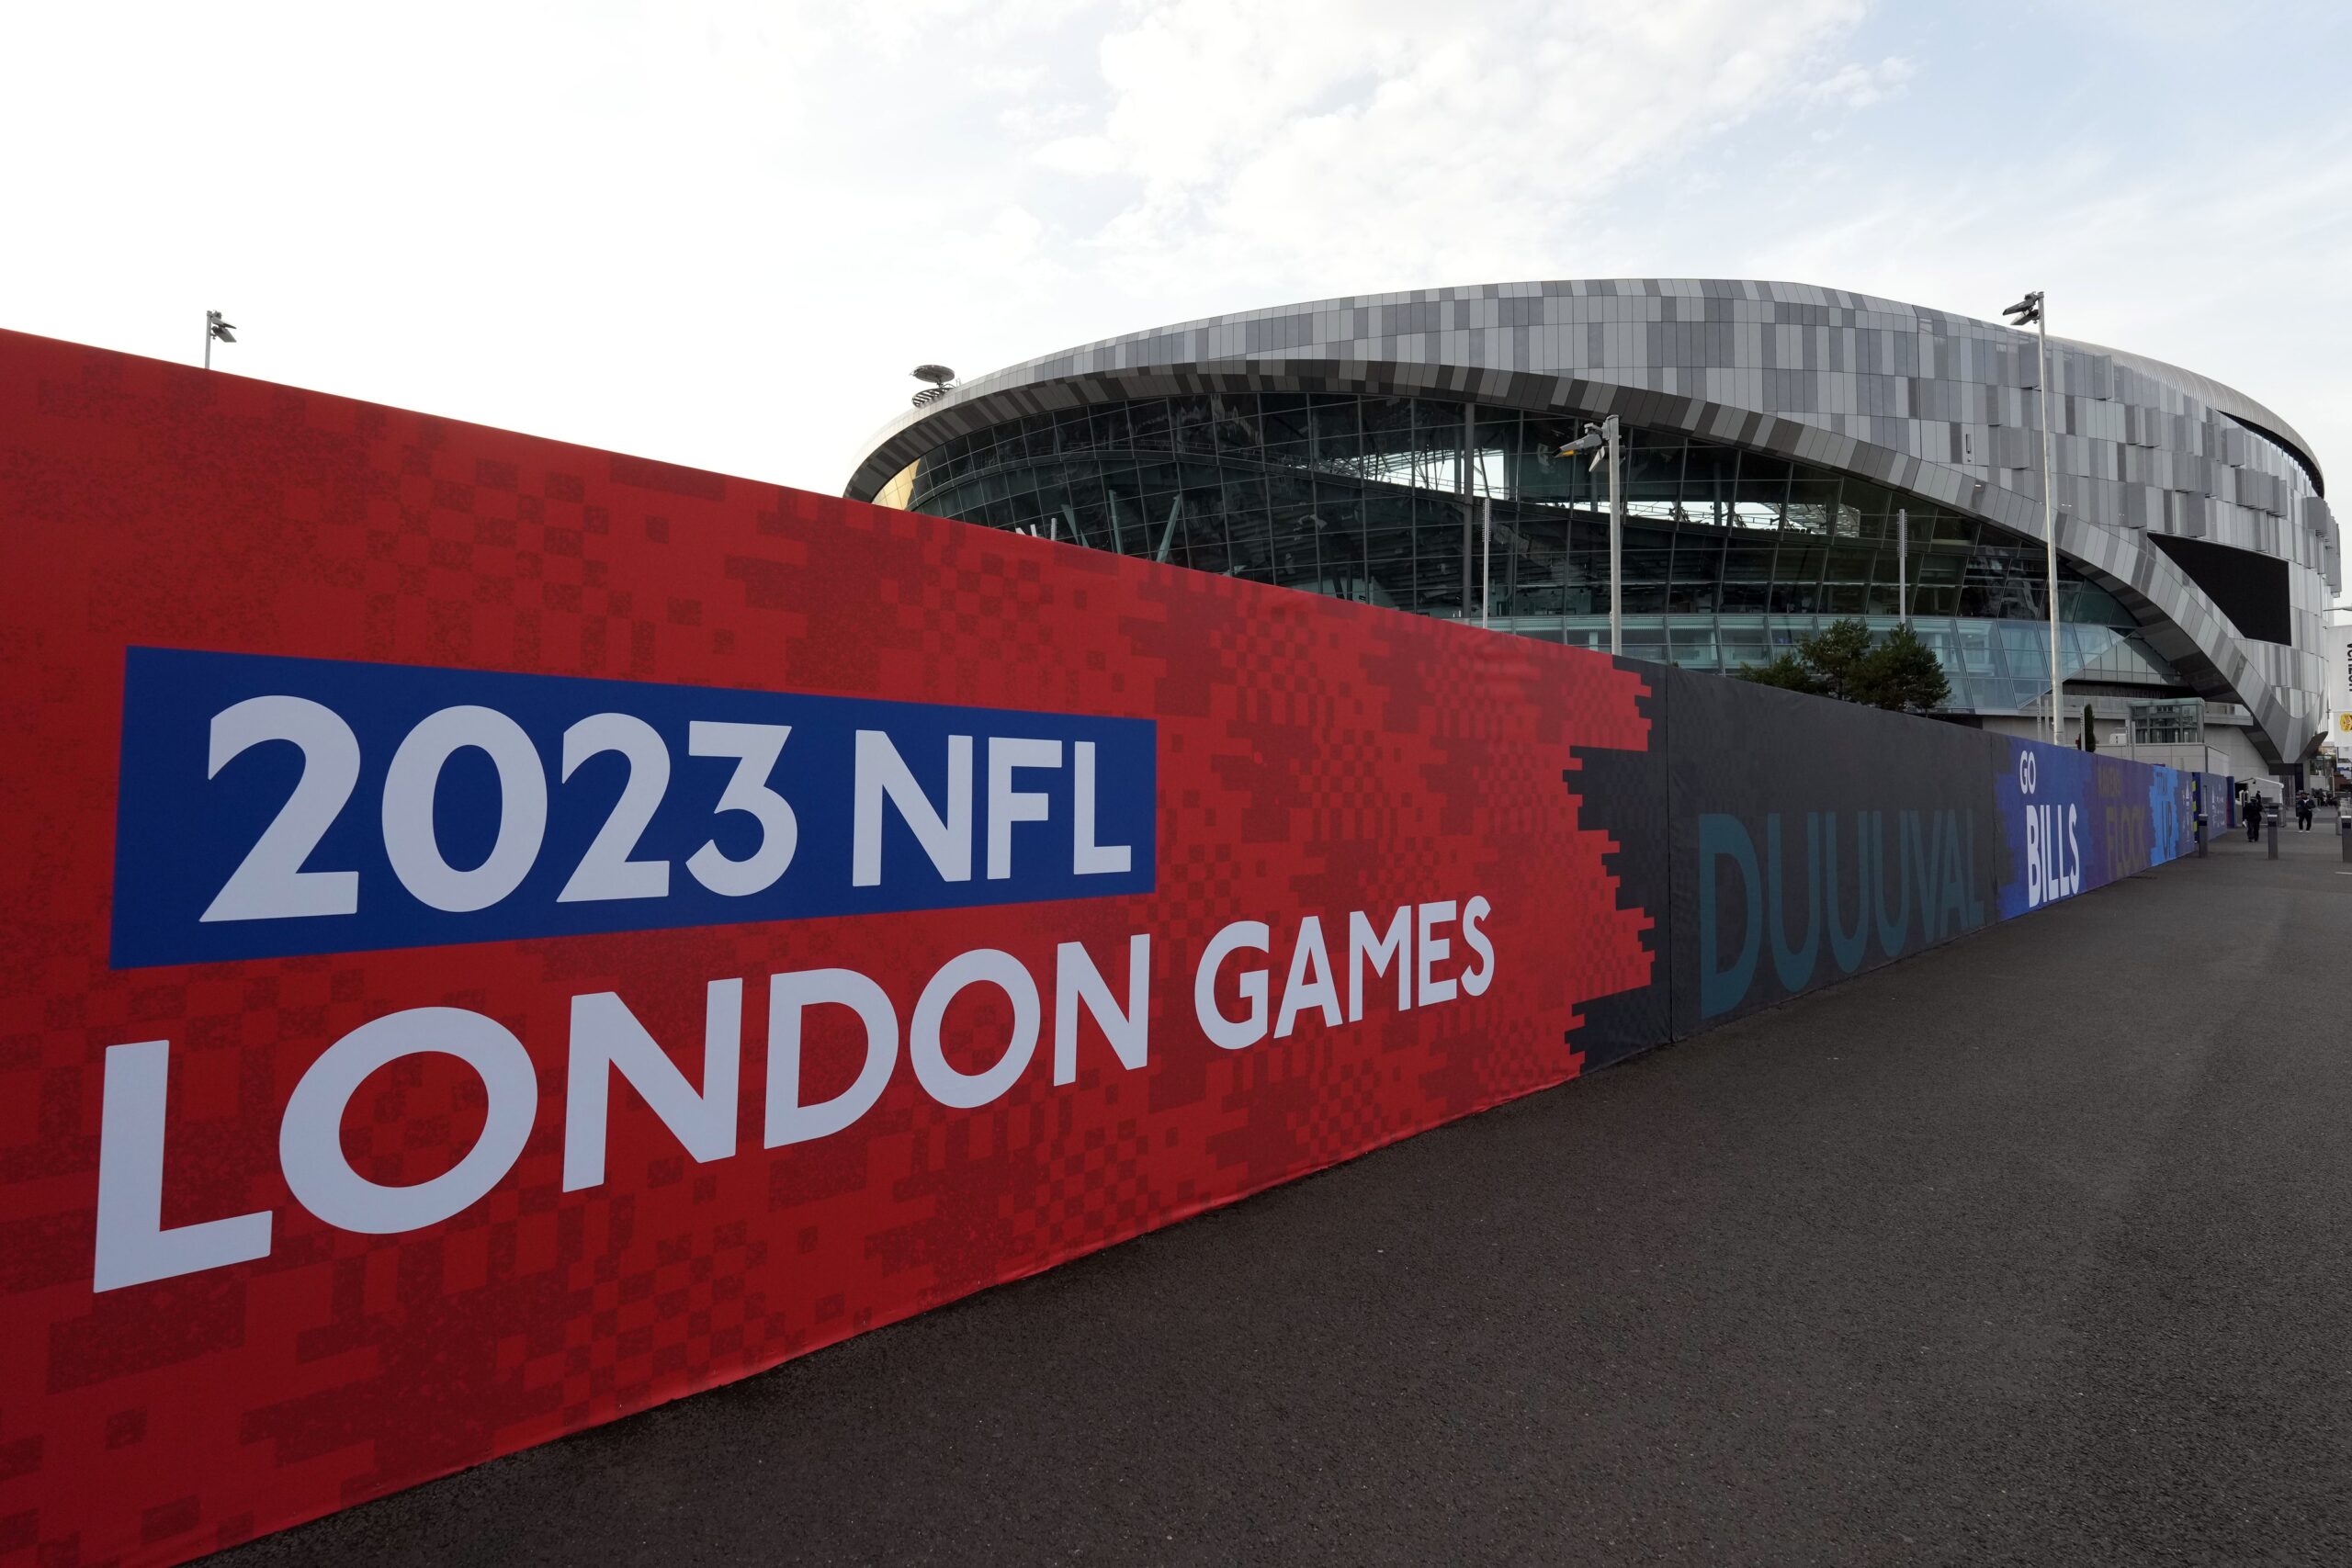 Baltimore Ravens vs Tennessee Titans - NFL London 2023 Tickets